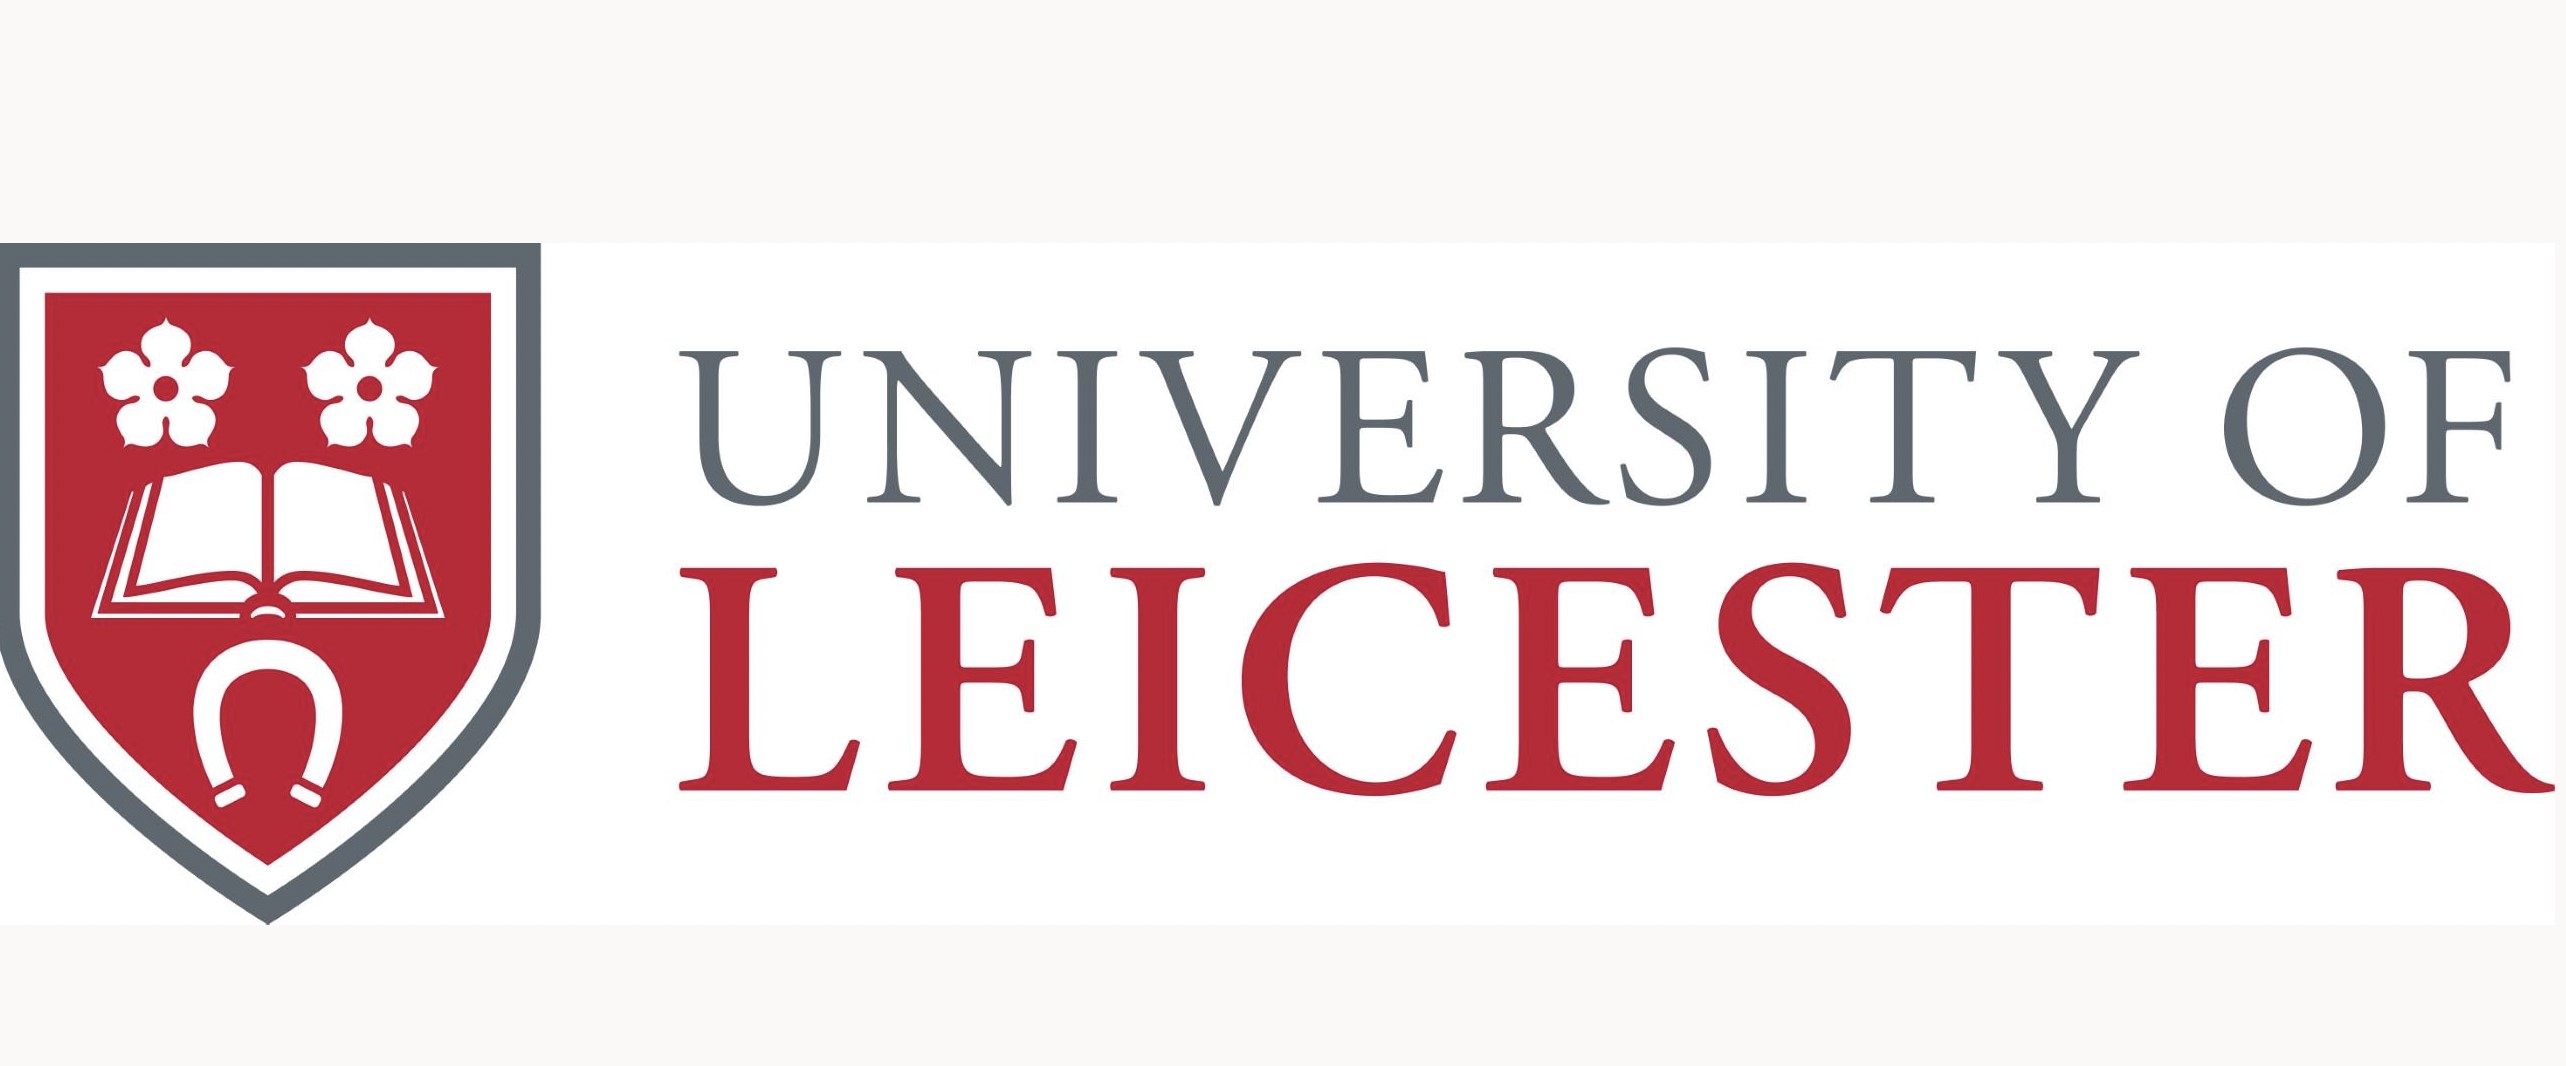 14-mind-blowing-facts-about-university-of-leicester